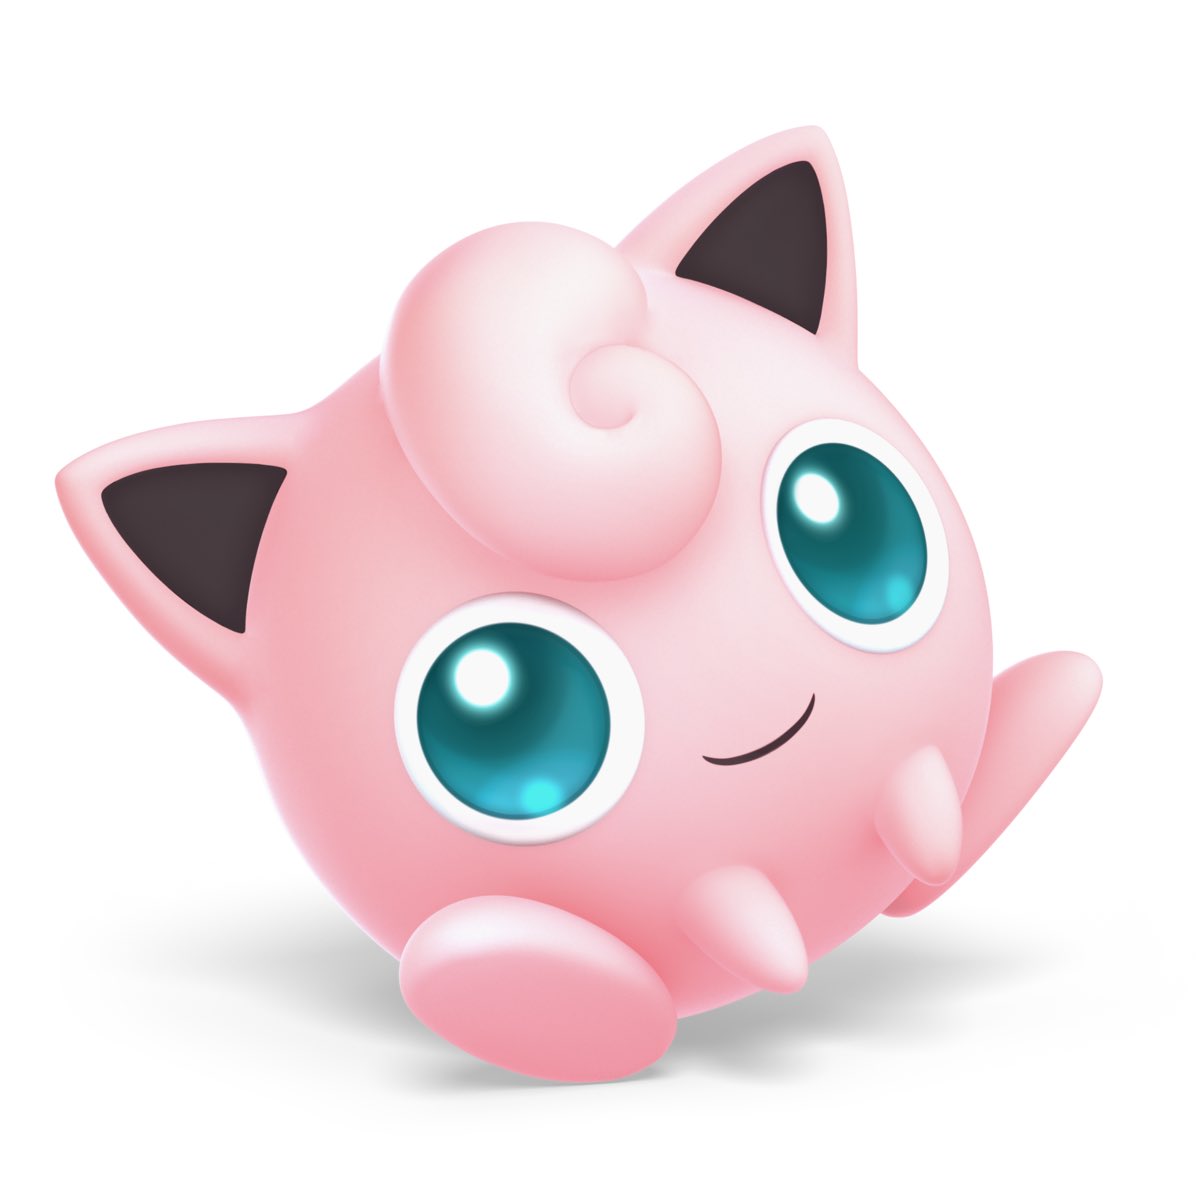 Jigglypuff Mains: As a Jigglypuff main myself I think I speak for all of us when I say BUFF. THE. PUFF. HE DESERVES A BUFF!!!